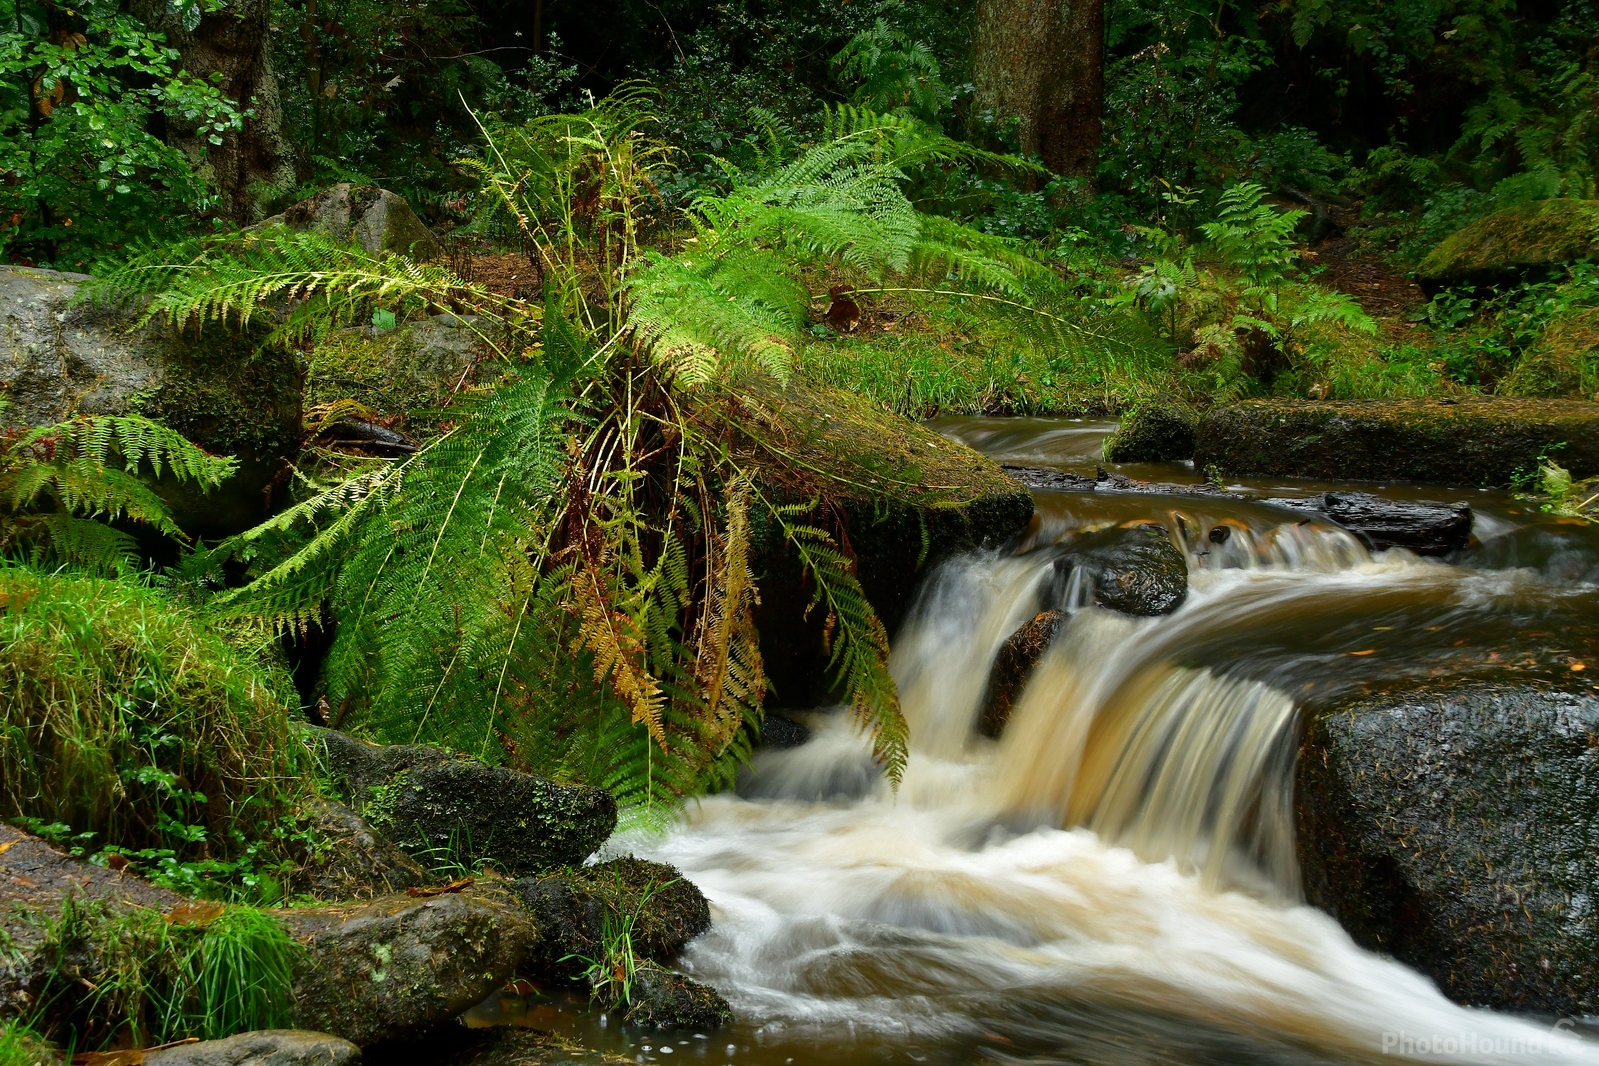 Image of Wyming Brook by Philip Eptlett